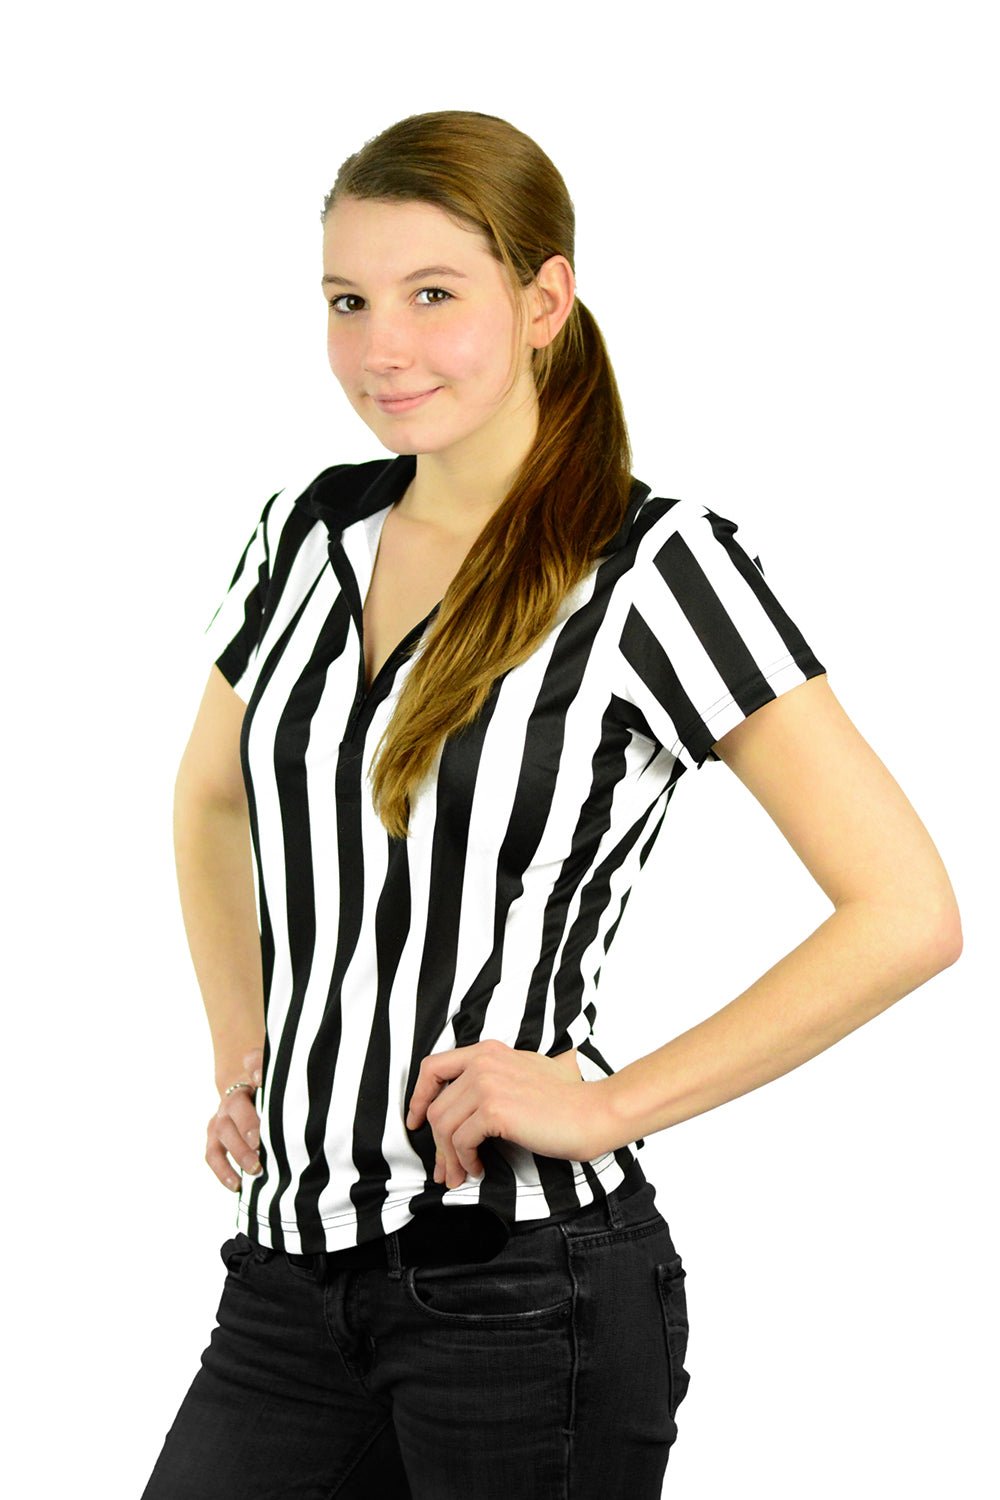 Women's 1/4 Zip Referee Shirt For Officials and Uniforms W/ Embroidery - Mato & Hash